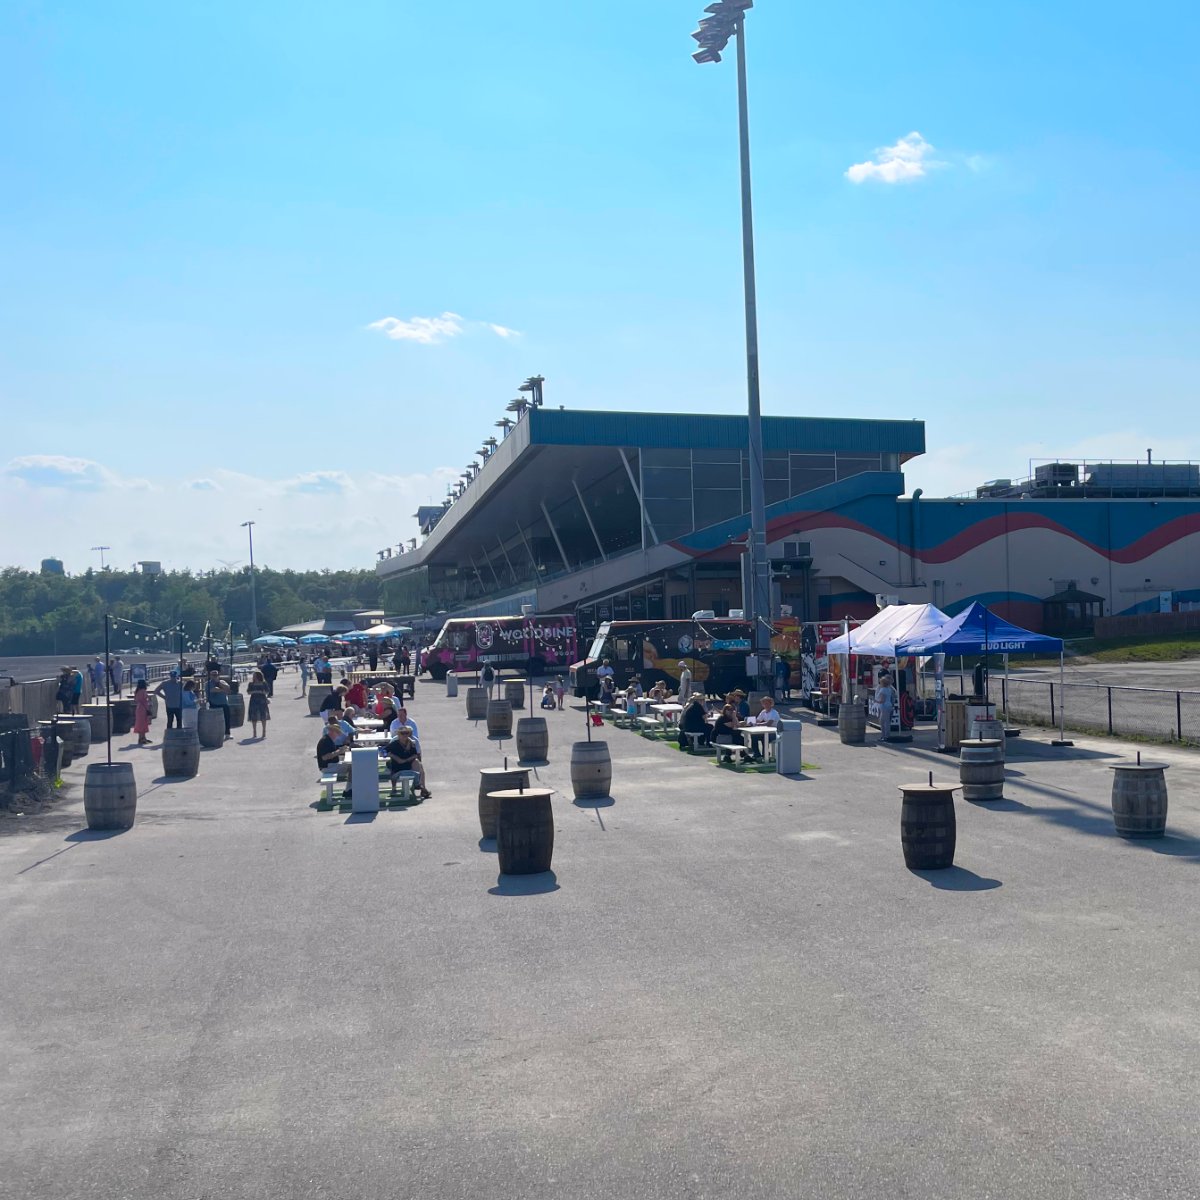 We're off to the races with @ConorGainsMusic for the @Pepsi #NACup at @WoodbineSB! A big thanks to everyone who helped make this event a success! #SpecialEvent 

Learn more about what we do here: soundboxpro.com

Photo Credit: Adam Thomas